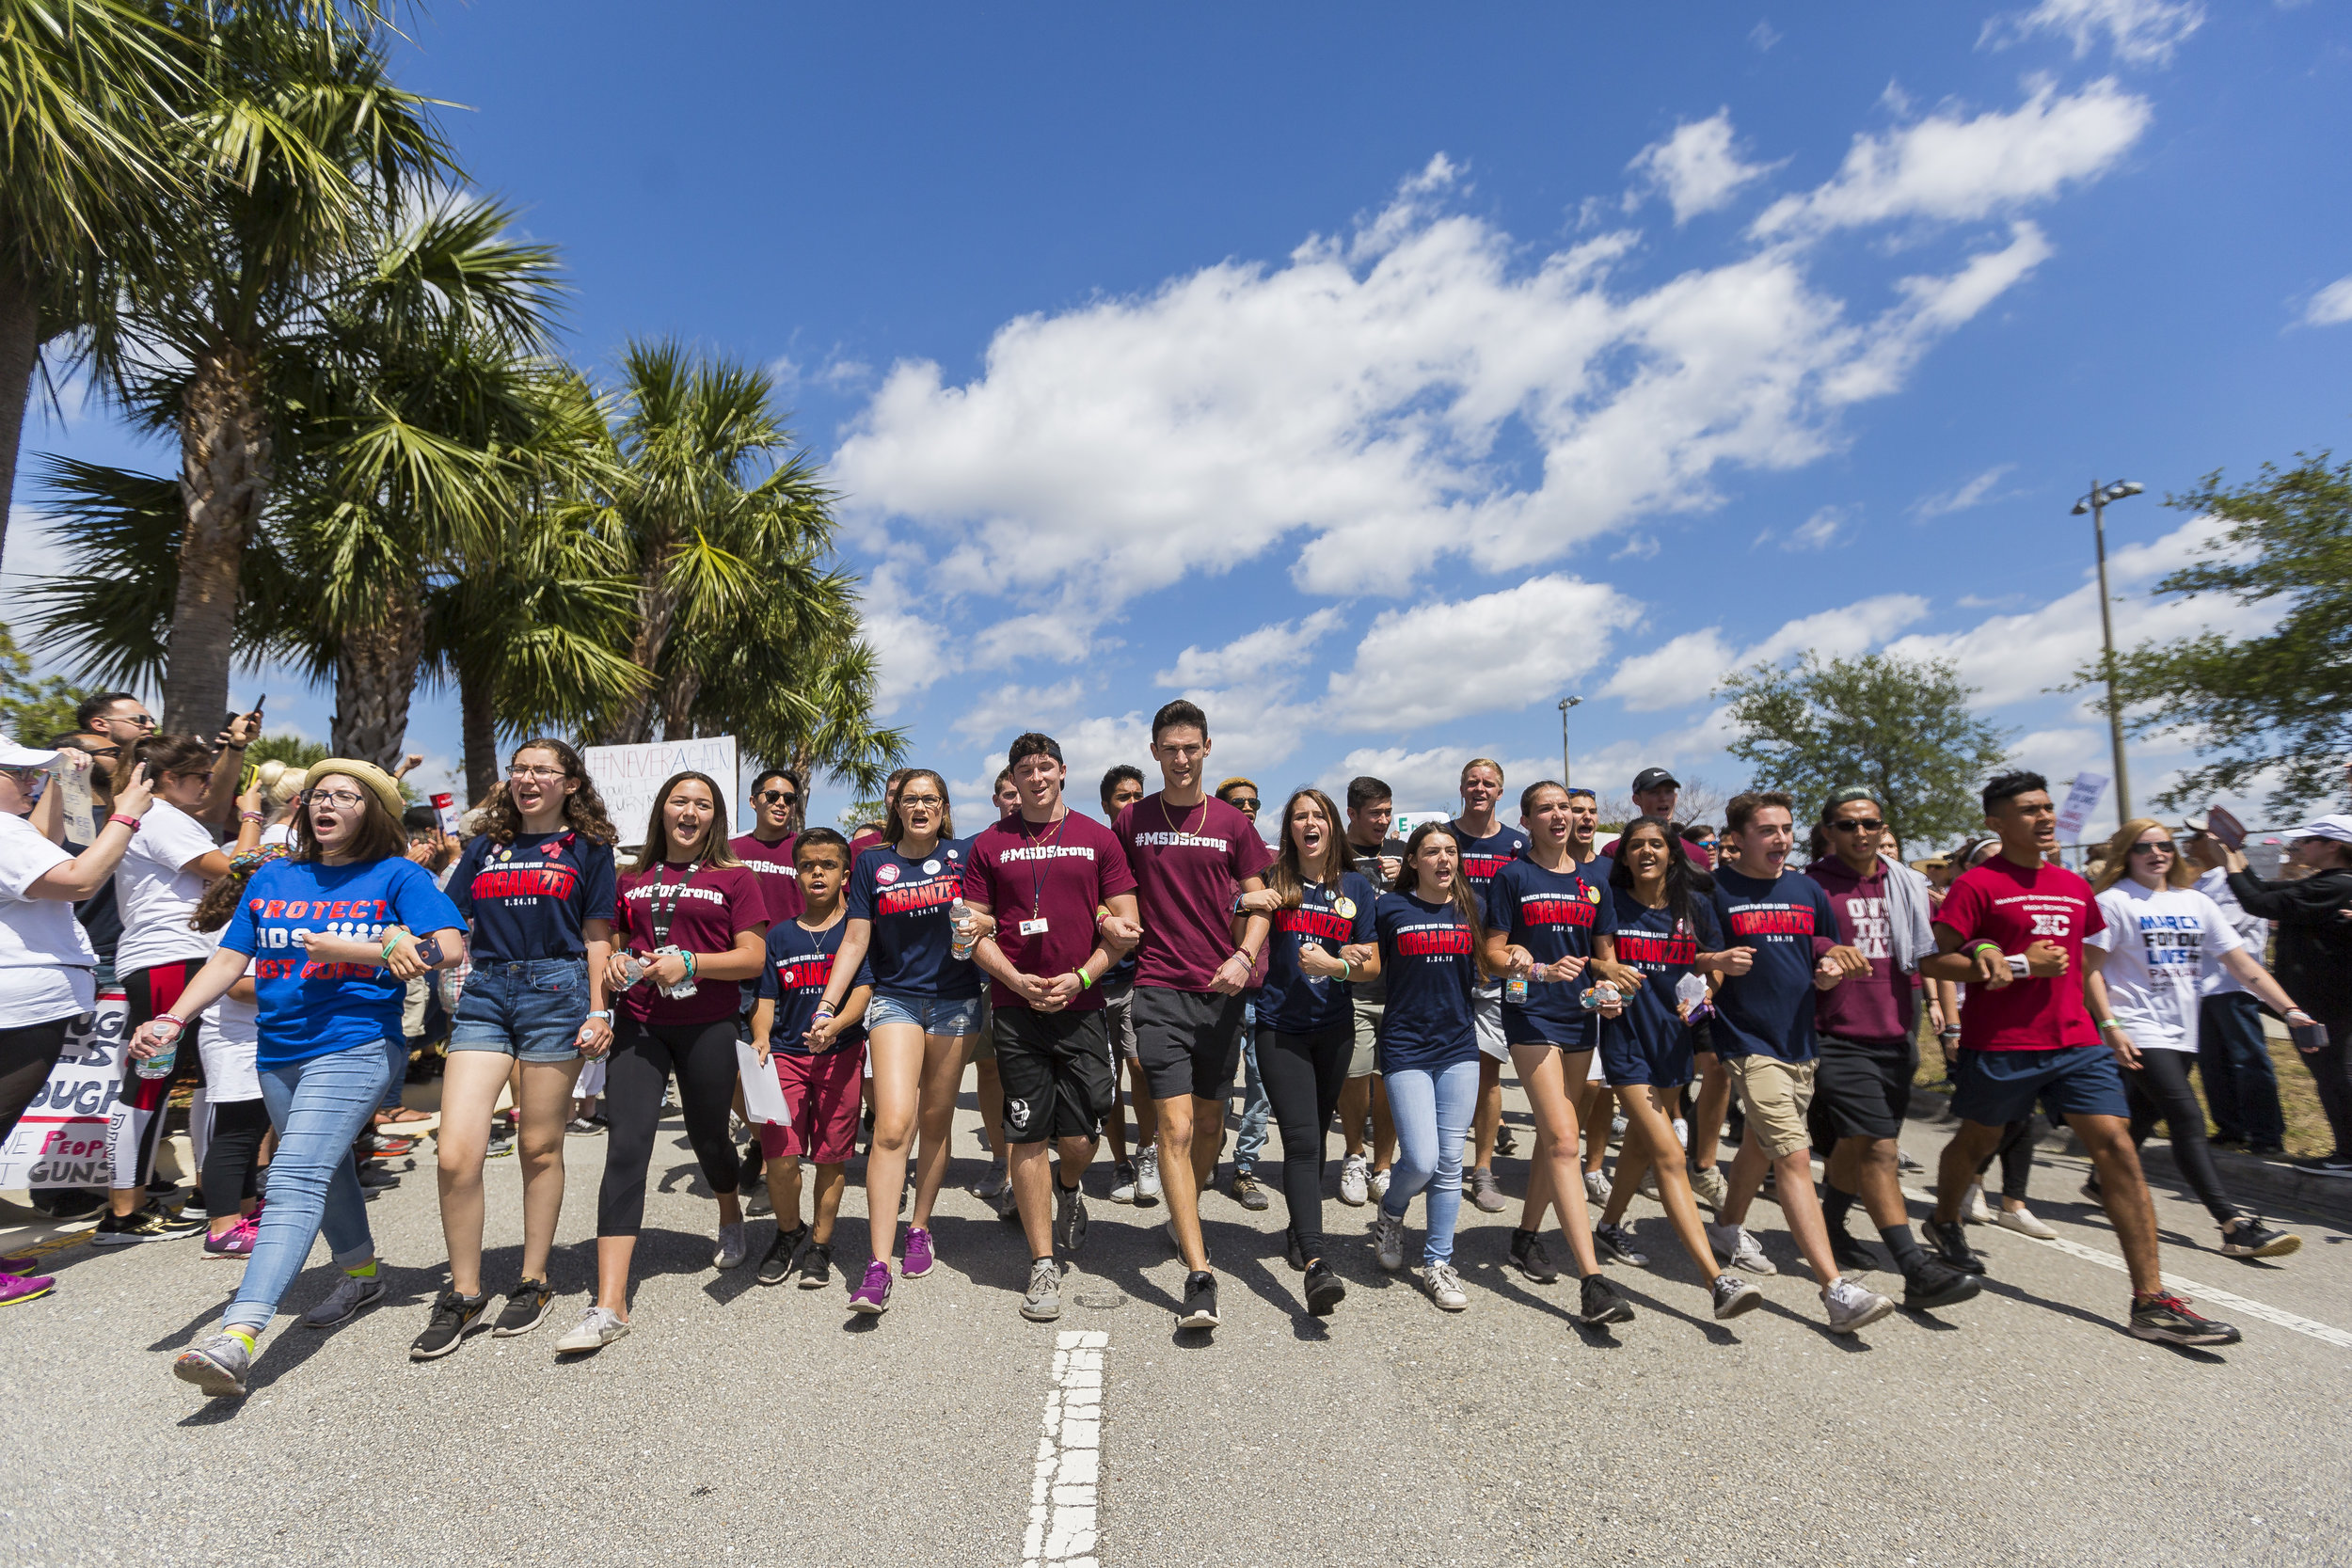  Marjory Stoneman Douglas High School students march toward their school while locking arms from Pine Trails Park in Parkland, Florida during the March for Our Lives protest on Saturday, March 24, 2018. 